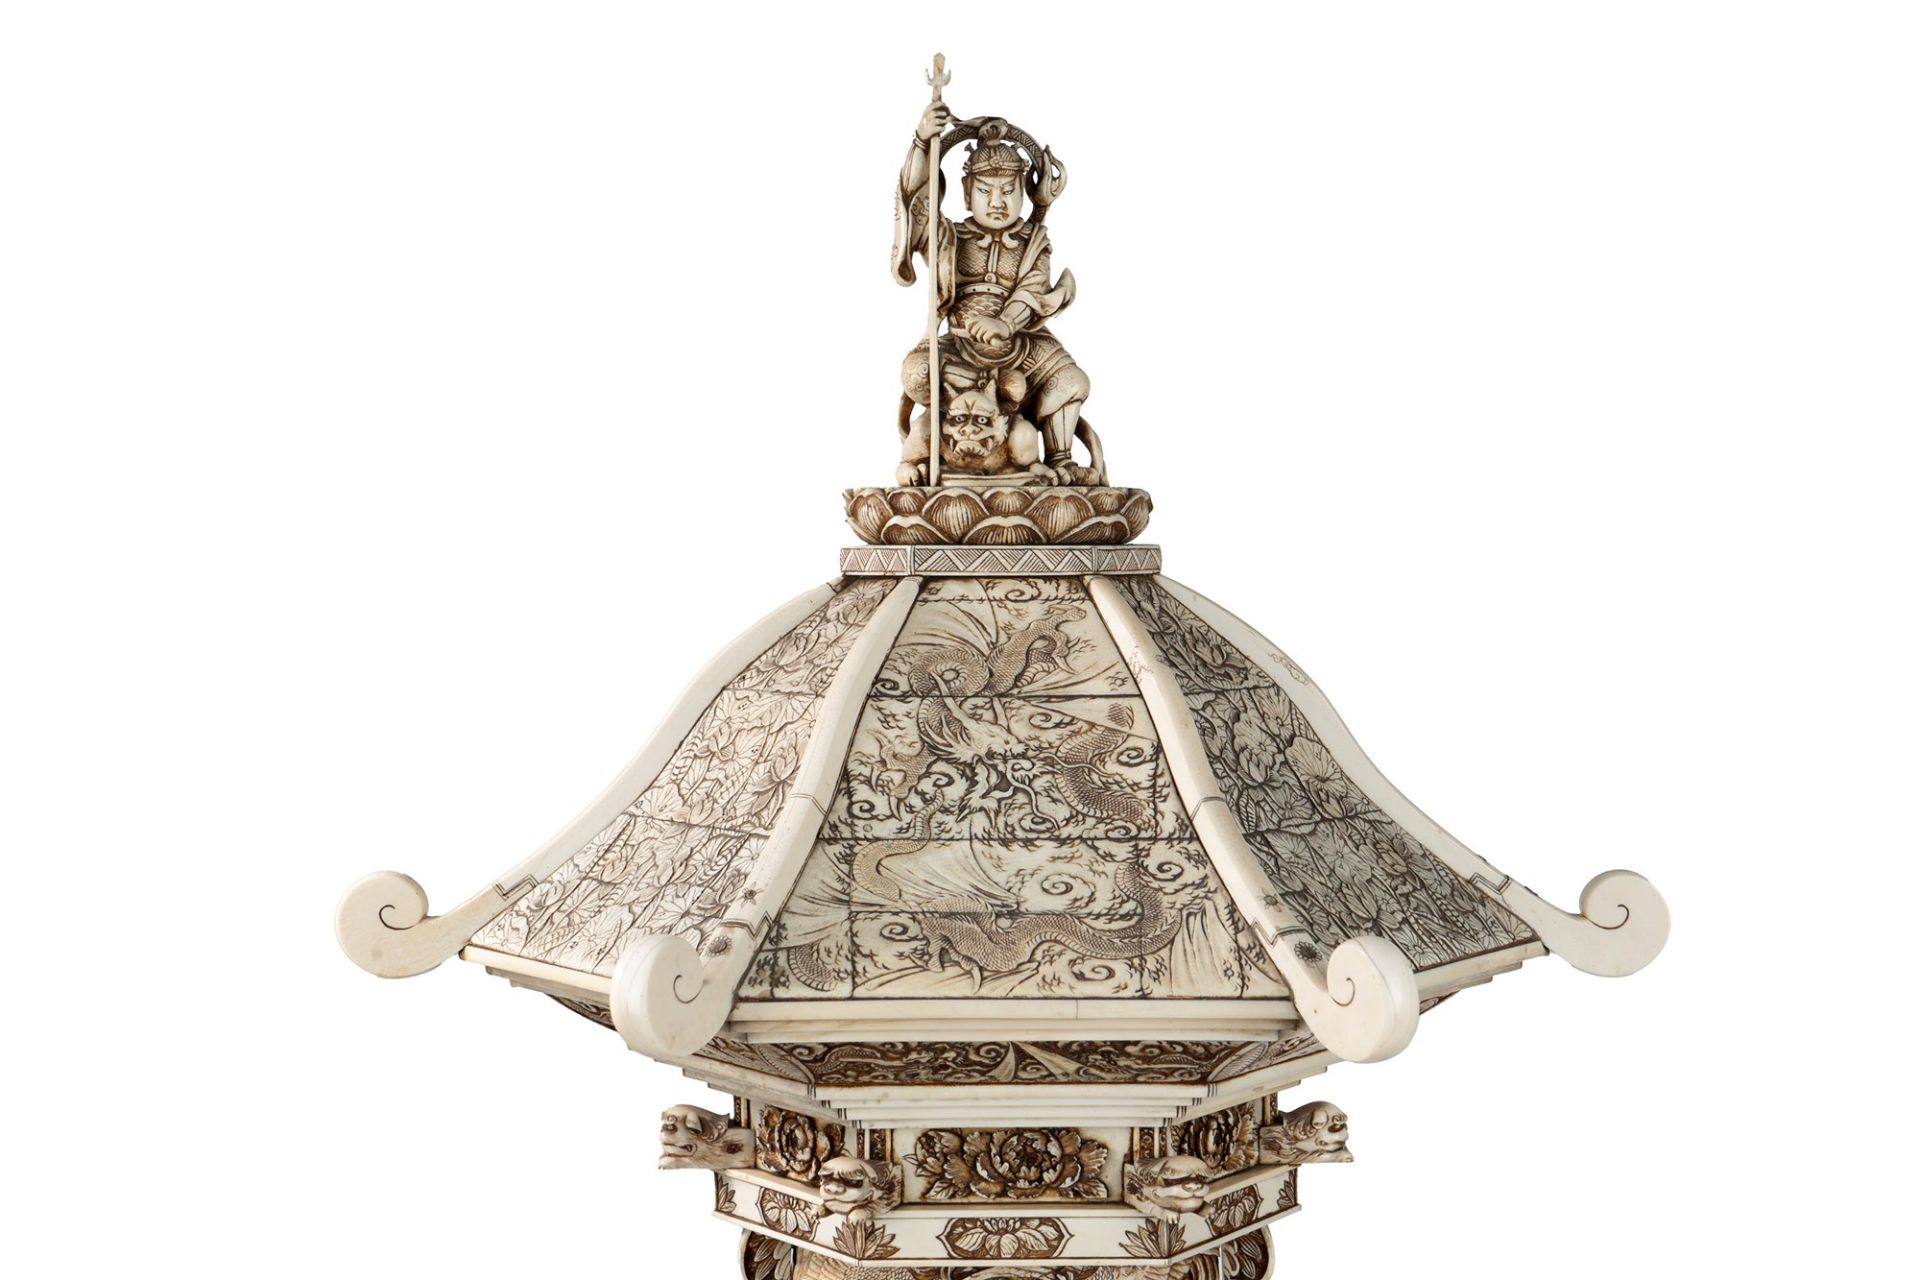 AN IMPORTANT IVORY PAGODA, Japan, Meiji period (1868-1912) - Image 8 of 9